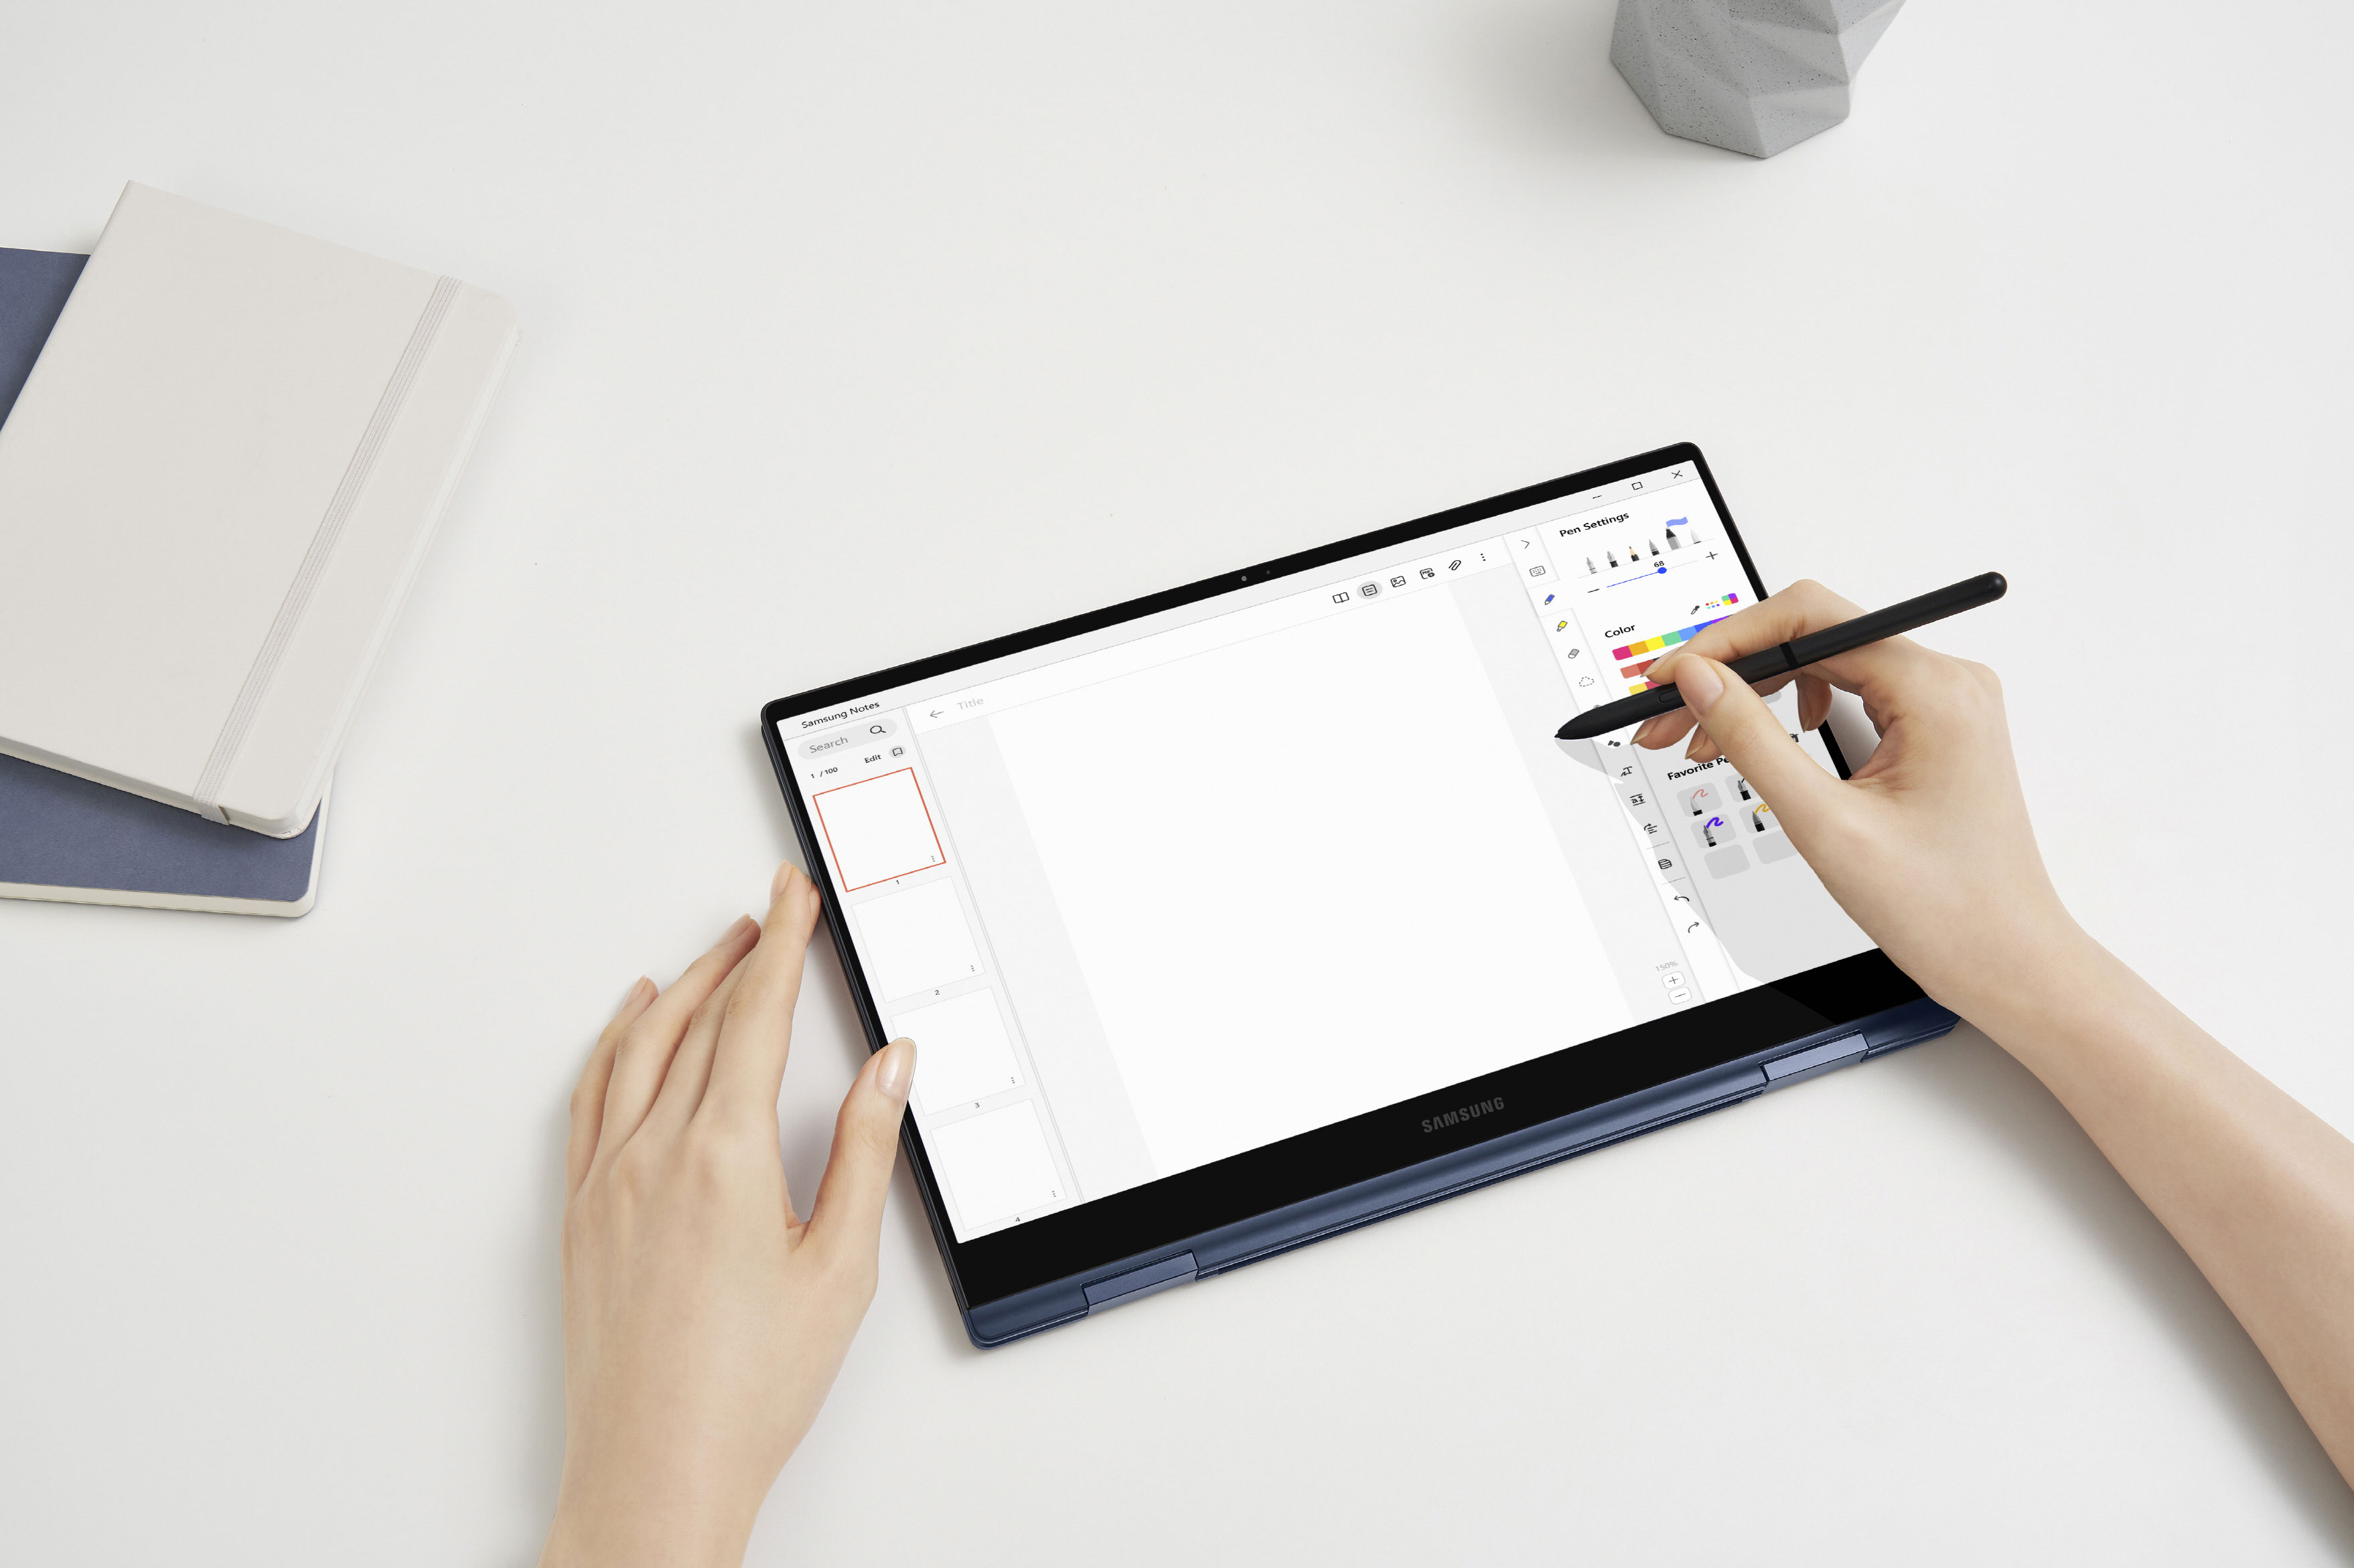 Galaxy Book Pro 360's S Pen Draws Inspiration from a Decade of  Collaboration with Wacom – Samsung Mobile Press